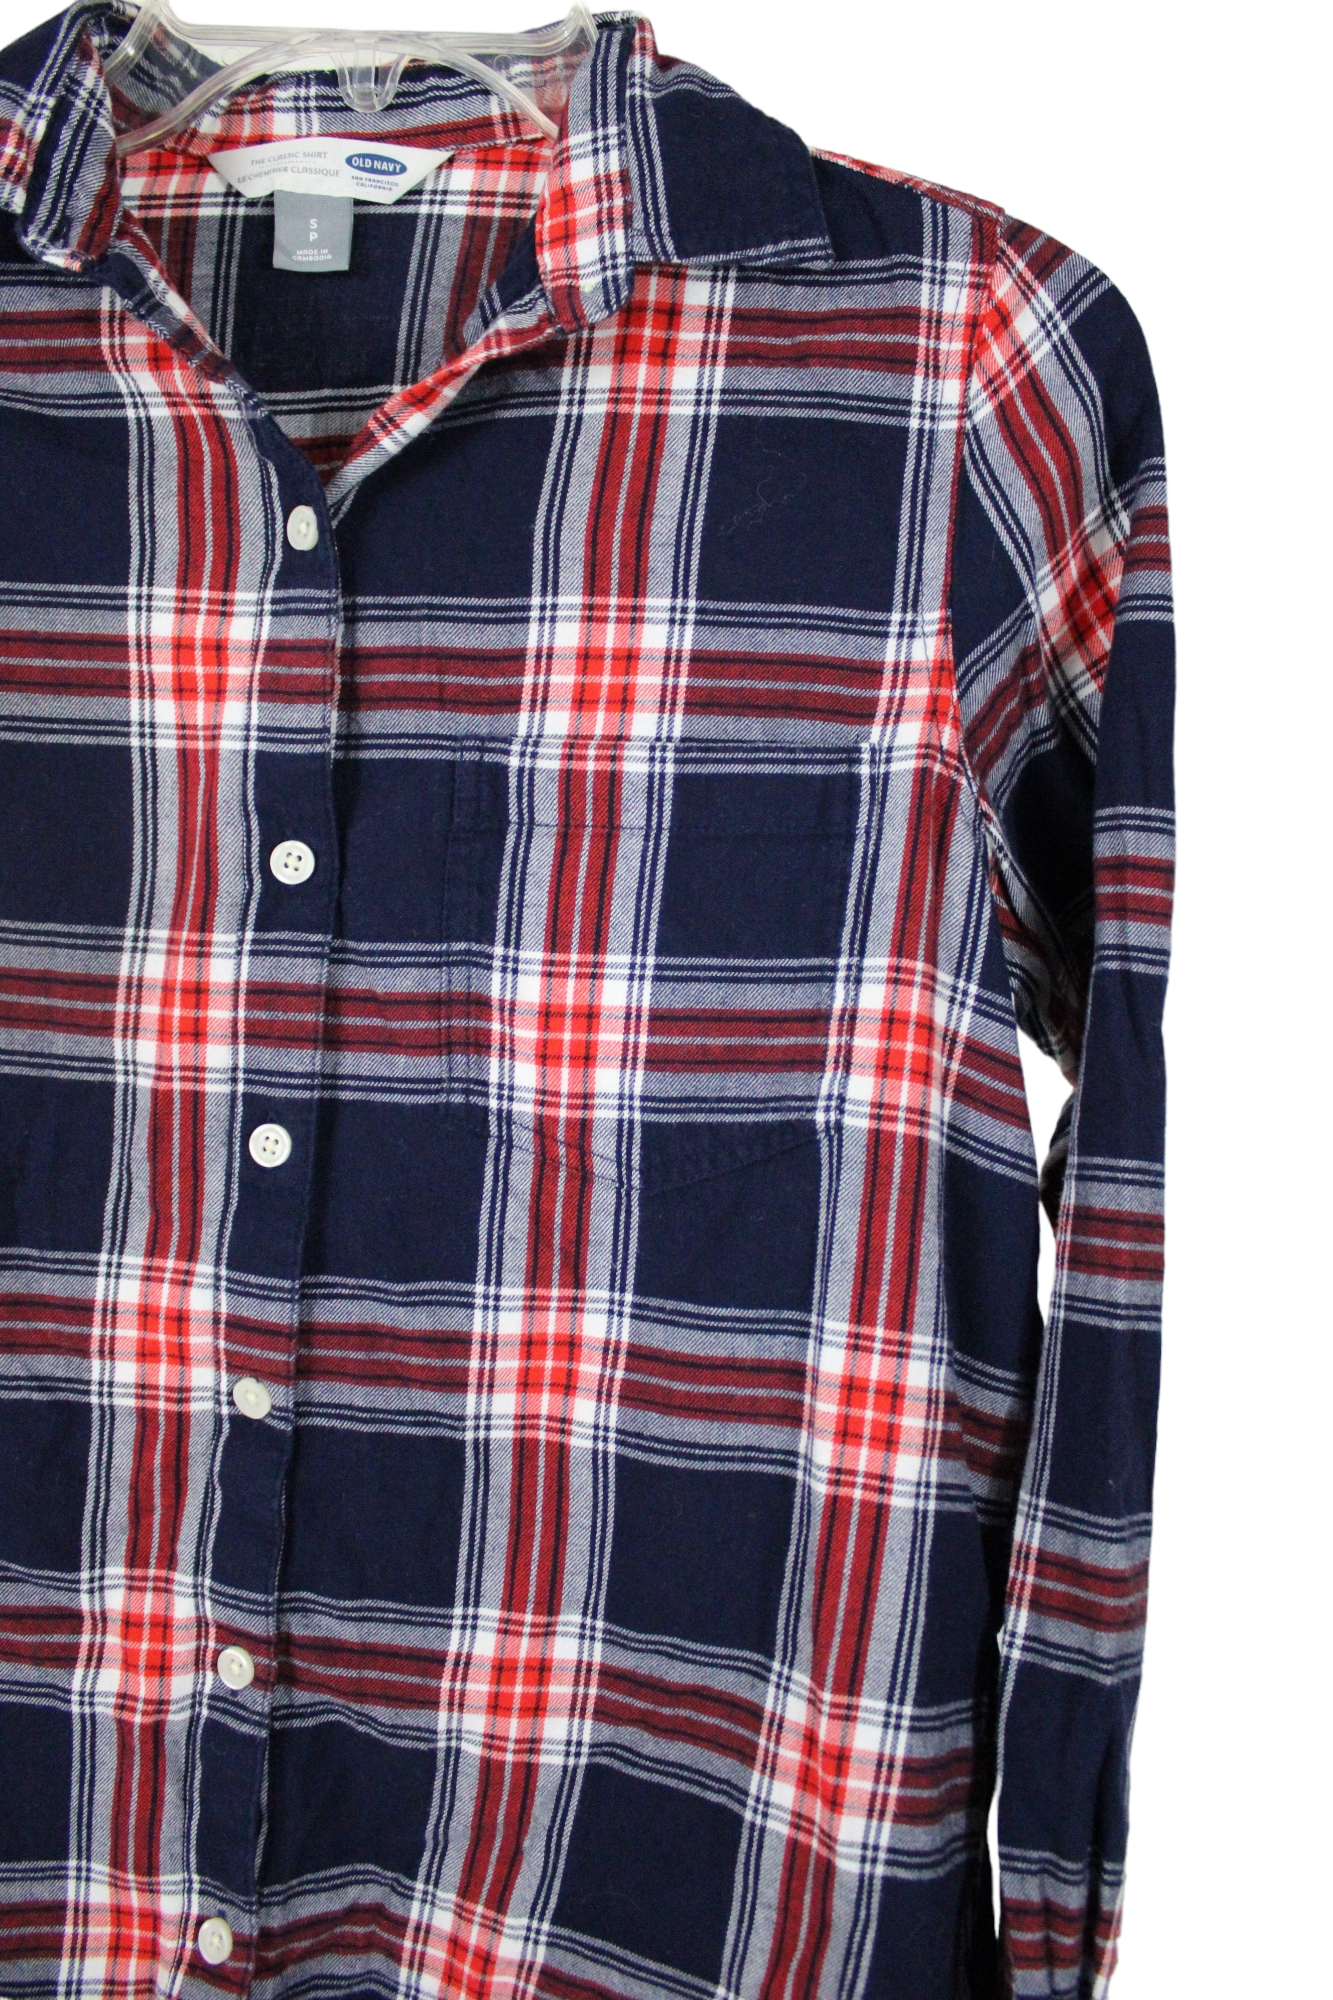 Old Navy, Shirts, Old Navy Cactus Button Down Mens Shirt